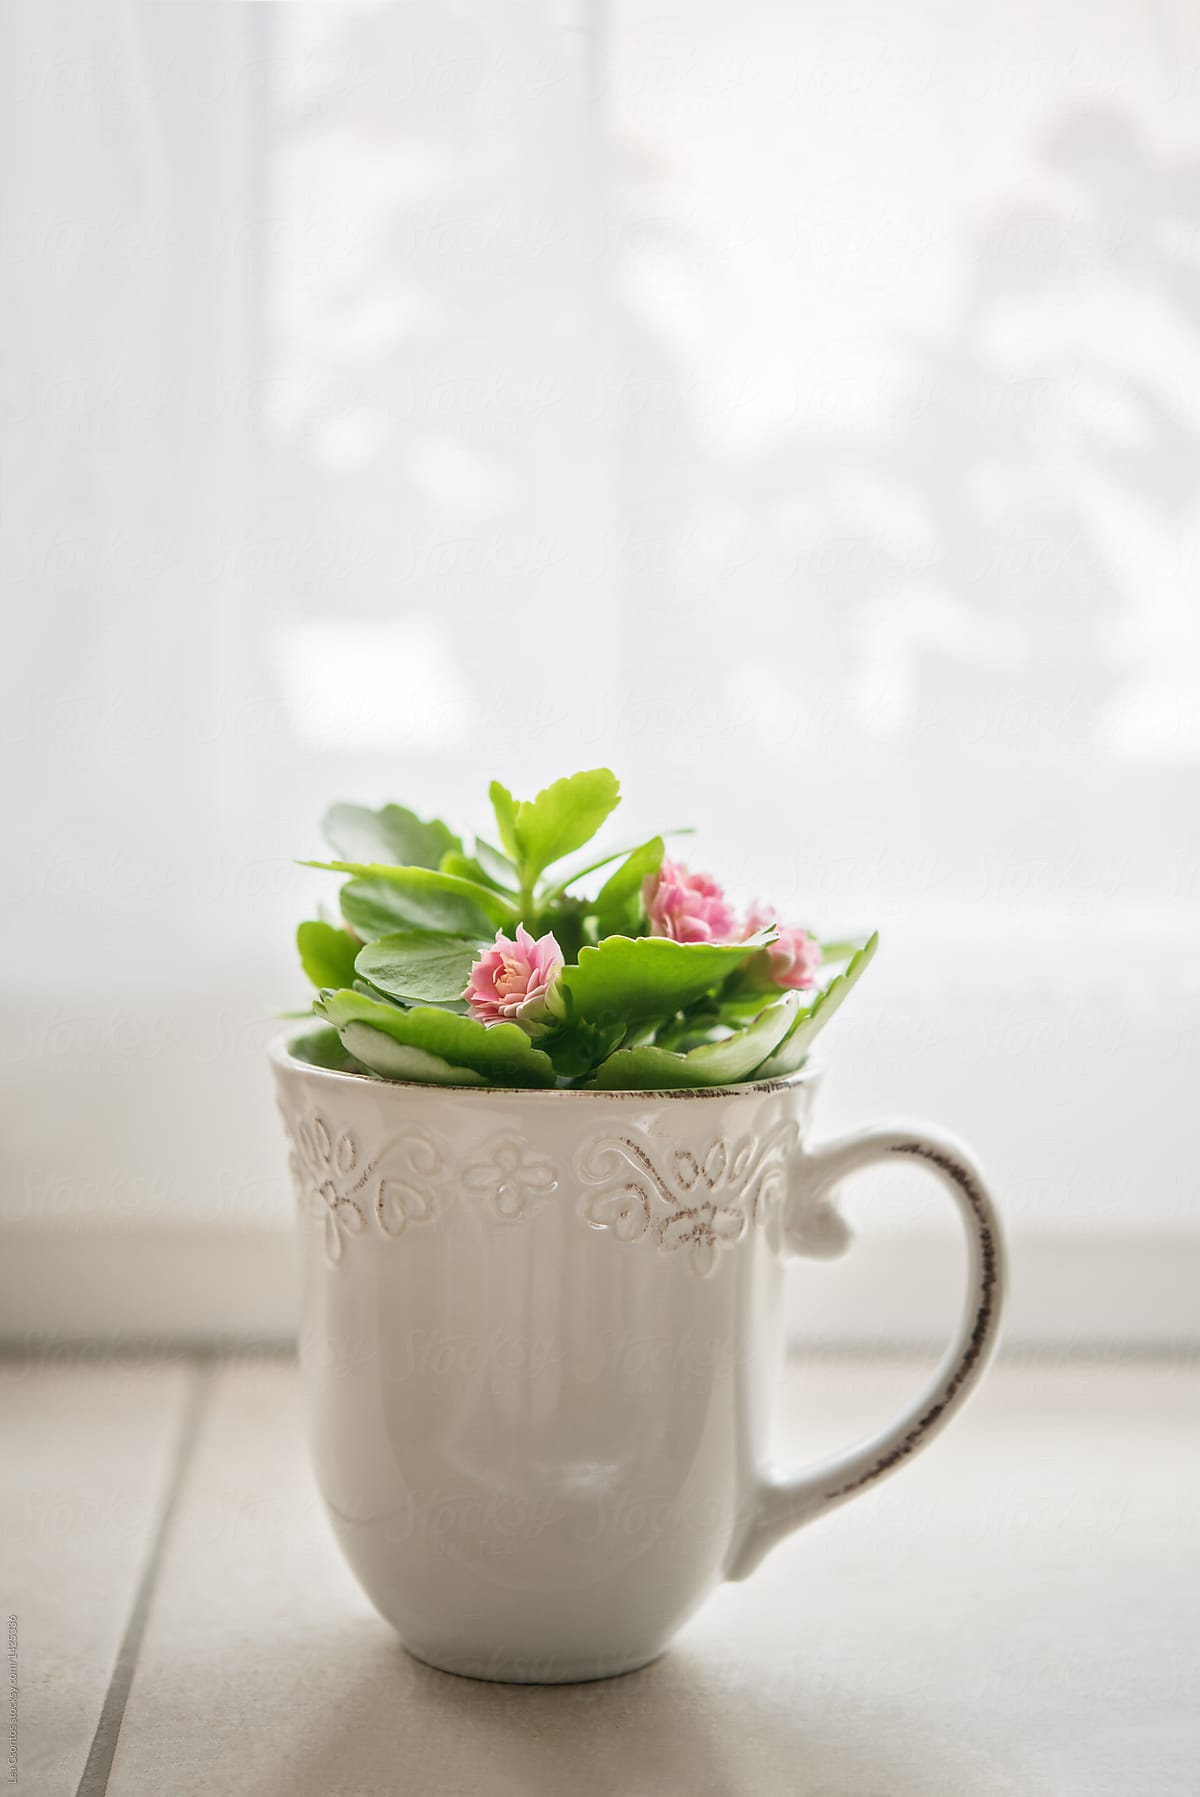 Blooming plant in a rustic white mug on a window sill